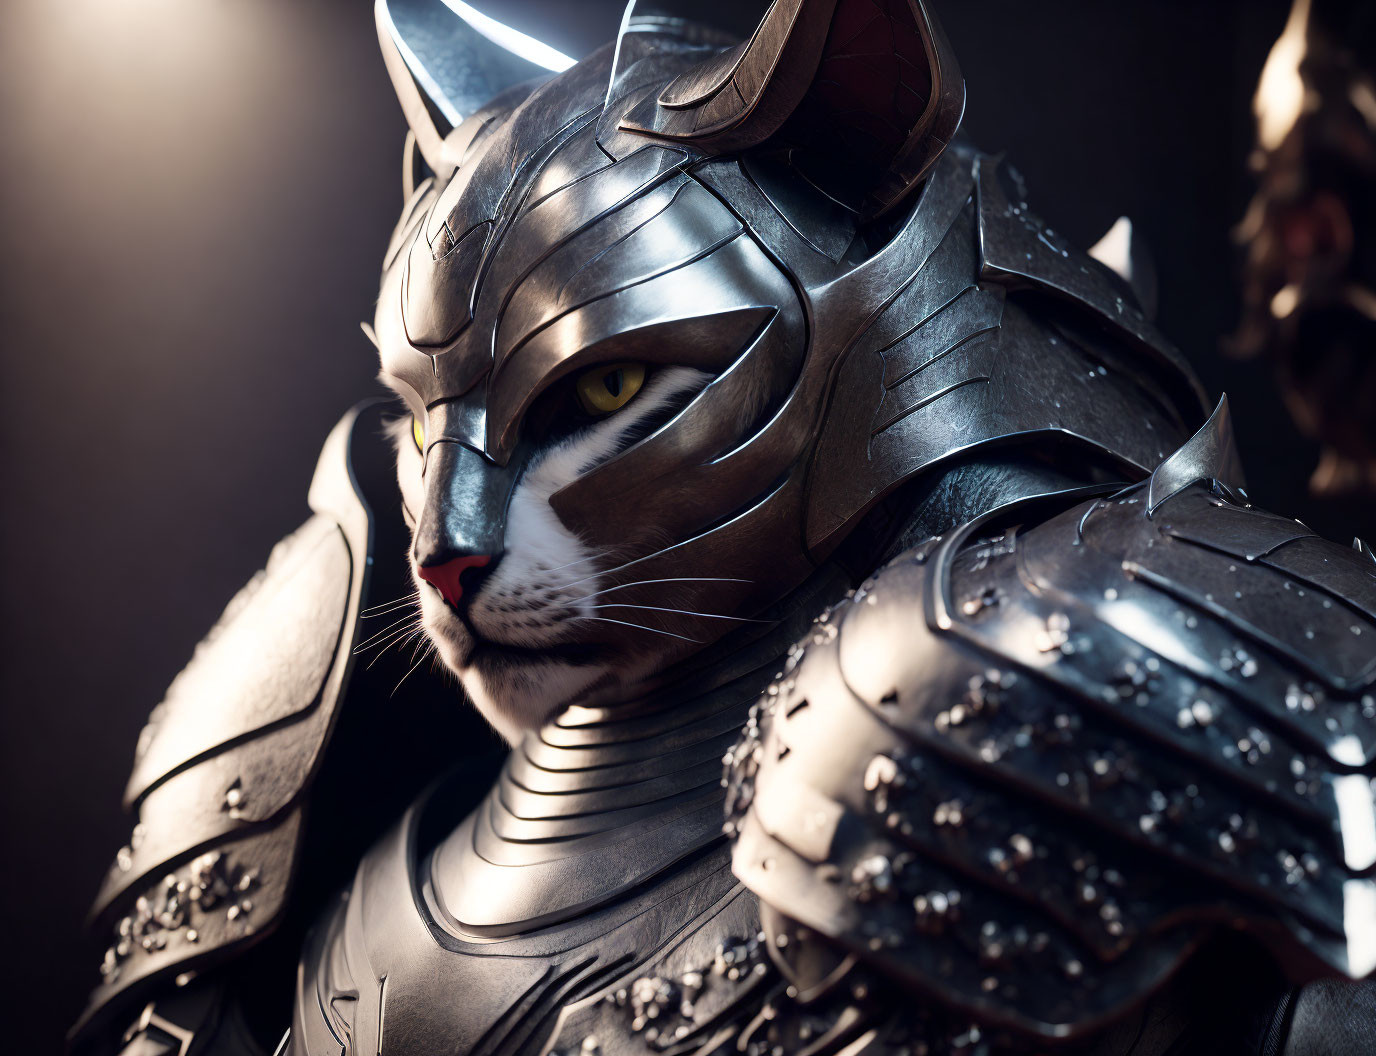 Just a cool cat knight from v2.7